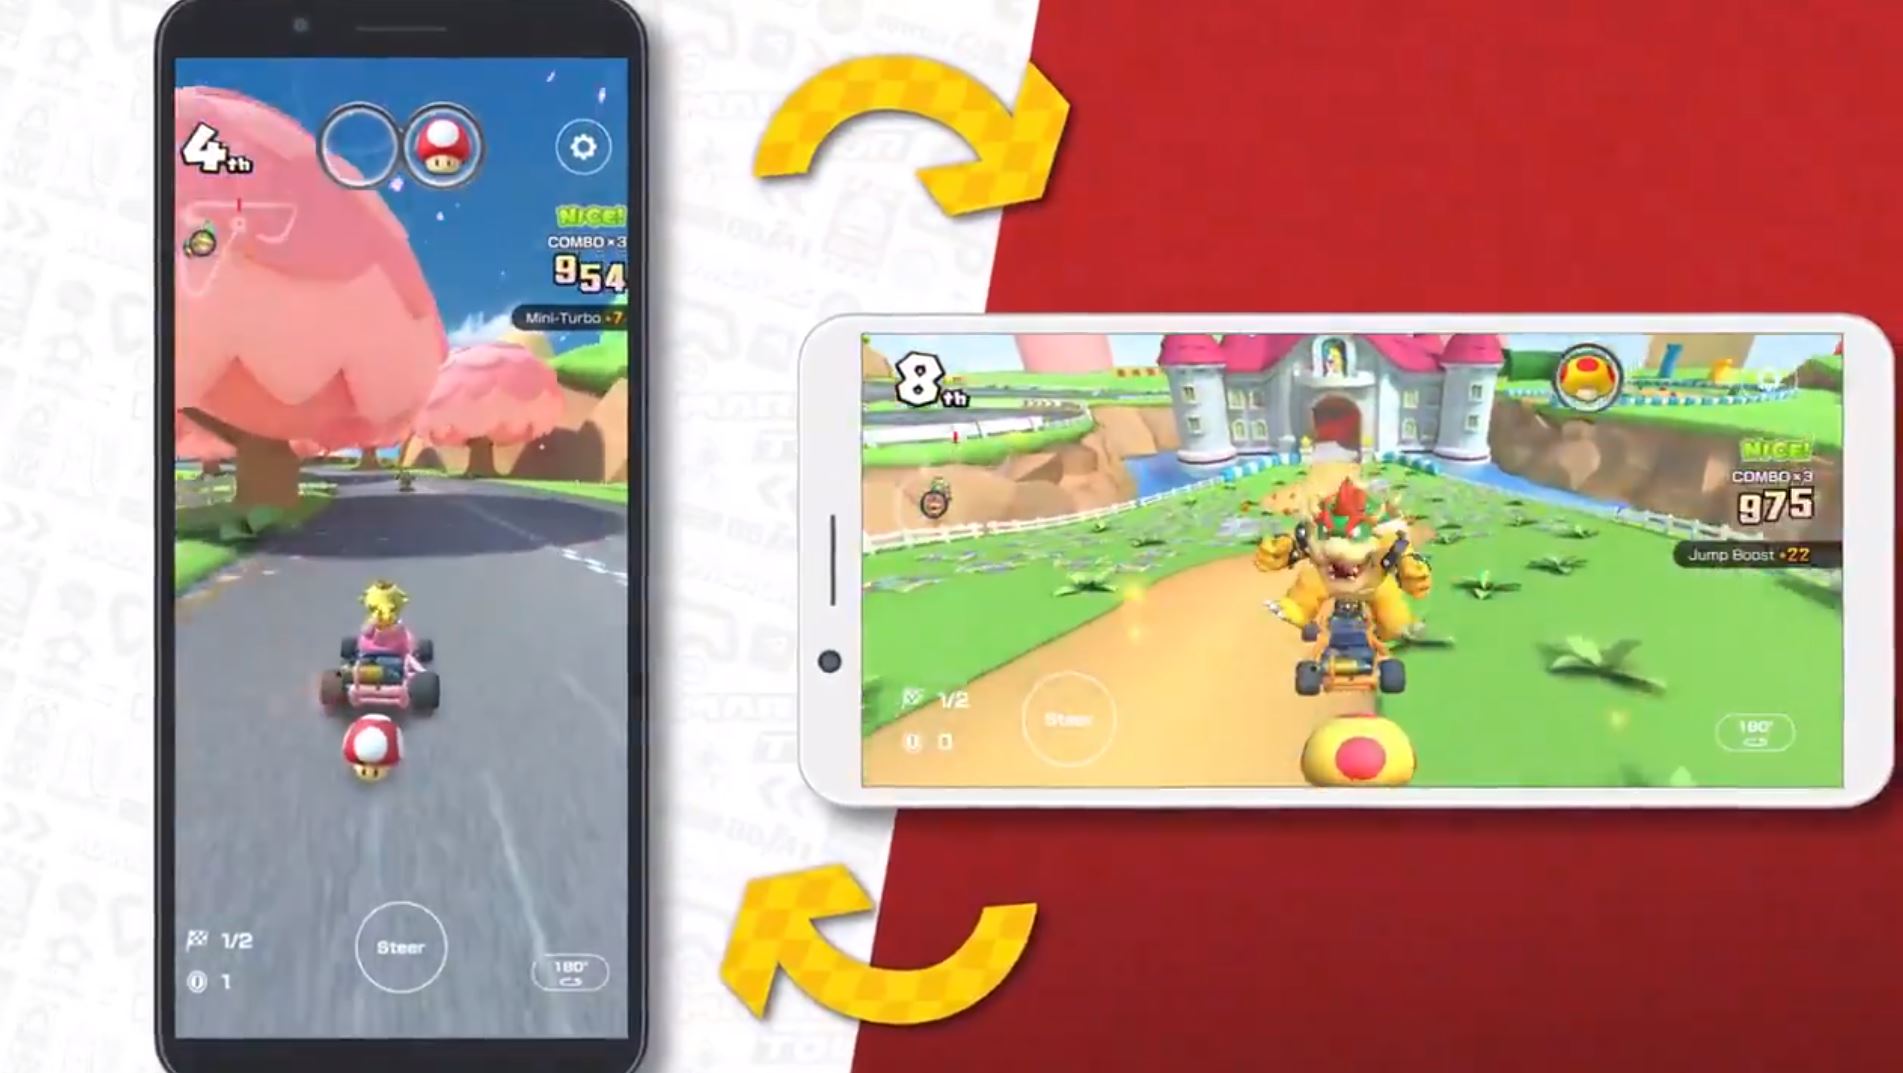 Mario Kart Tour Is Here: How to Download and Play